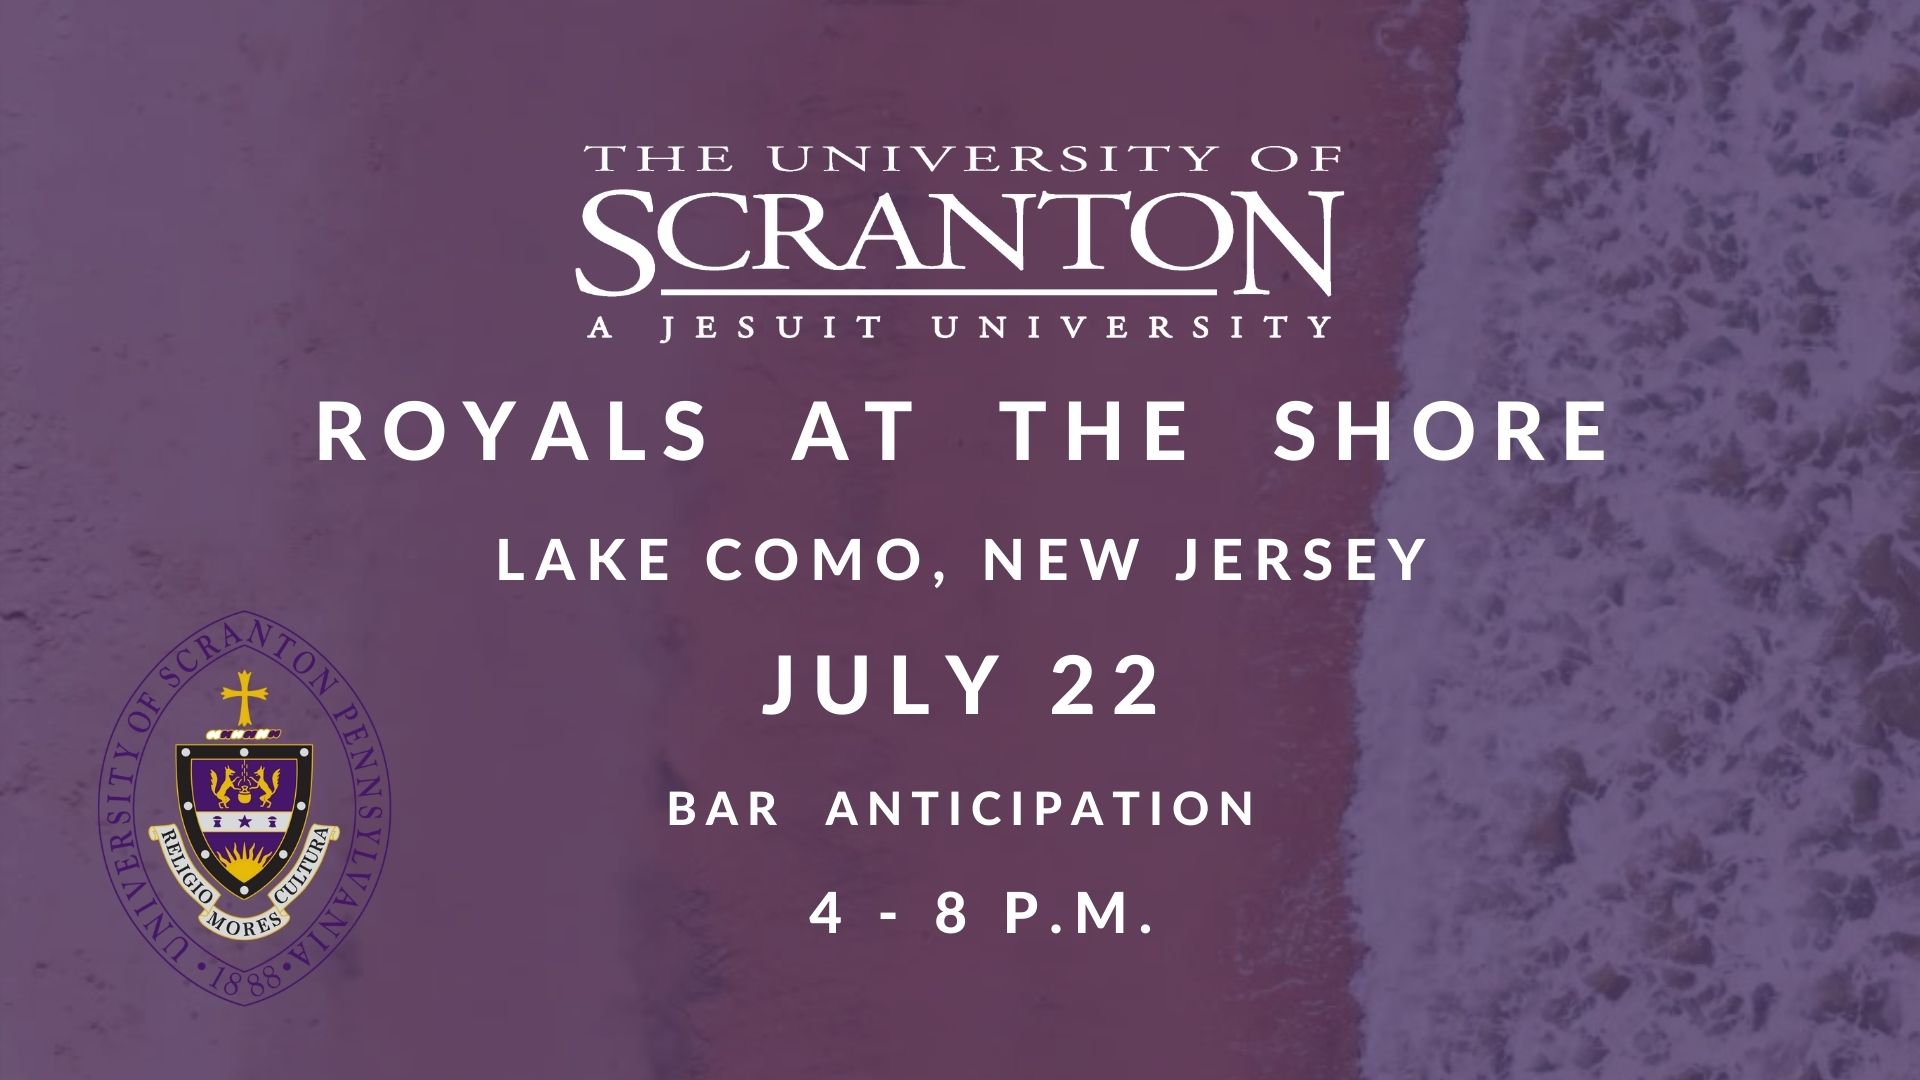 Save The Date For Royals At The Shore July 22 image